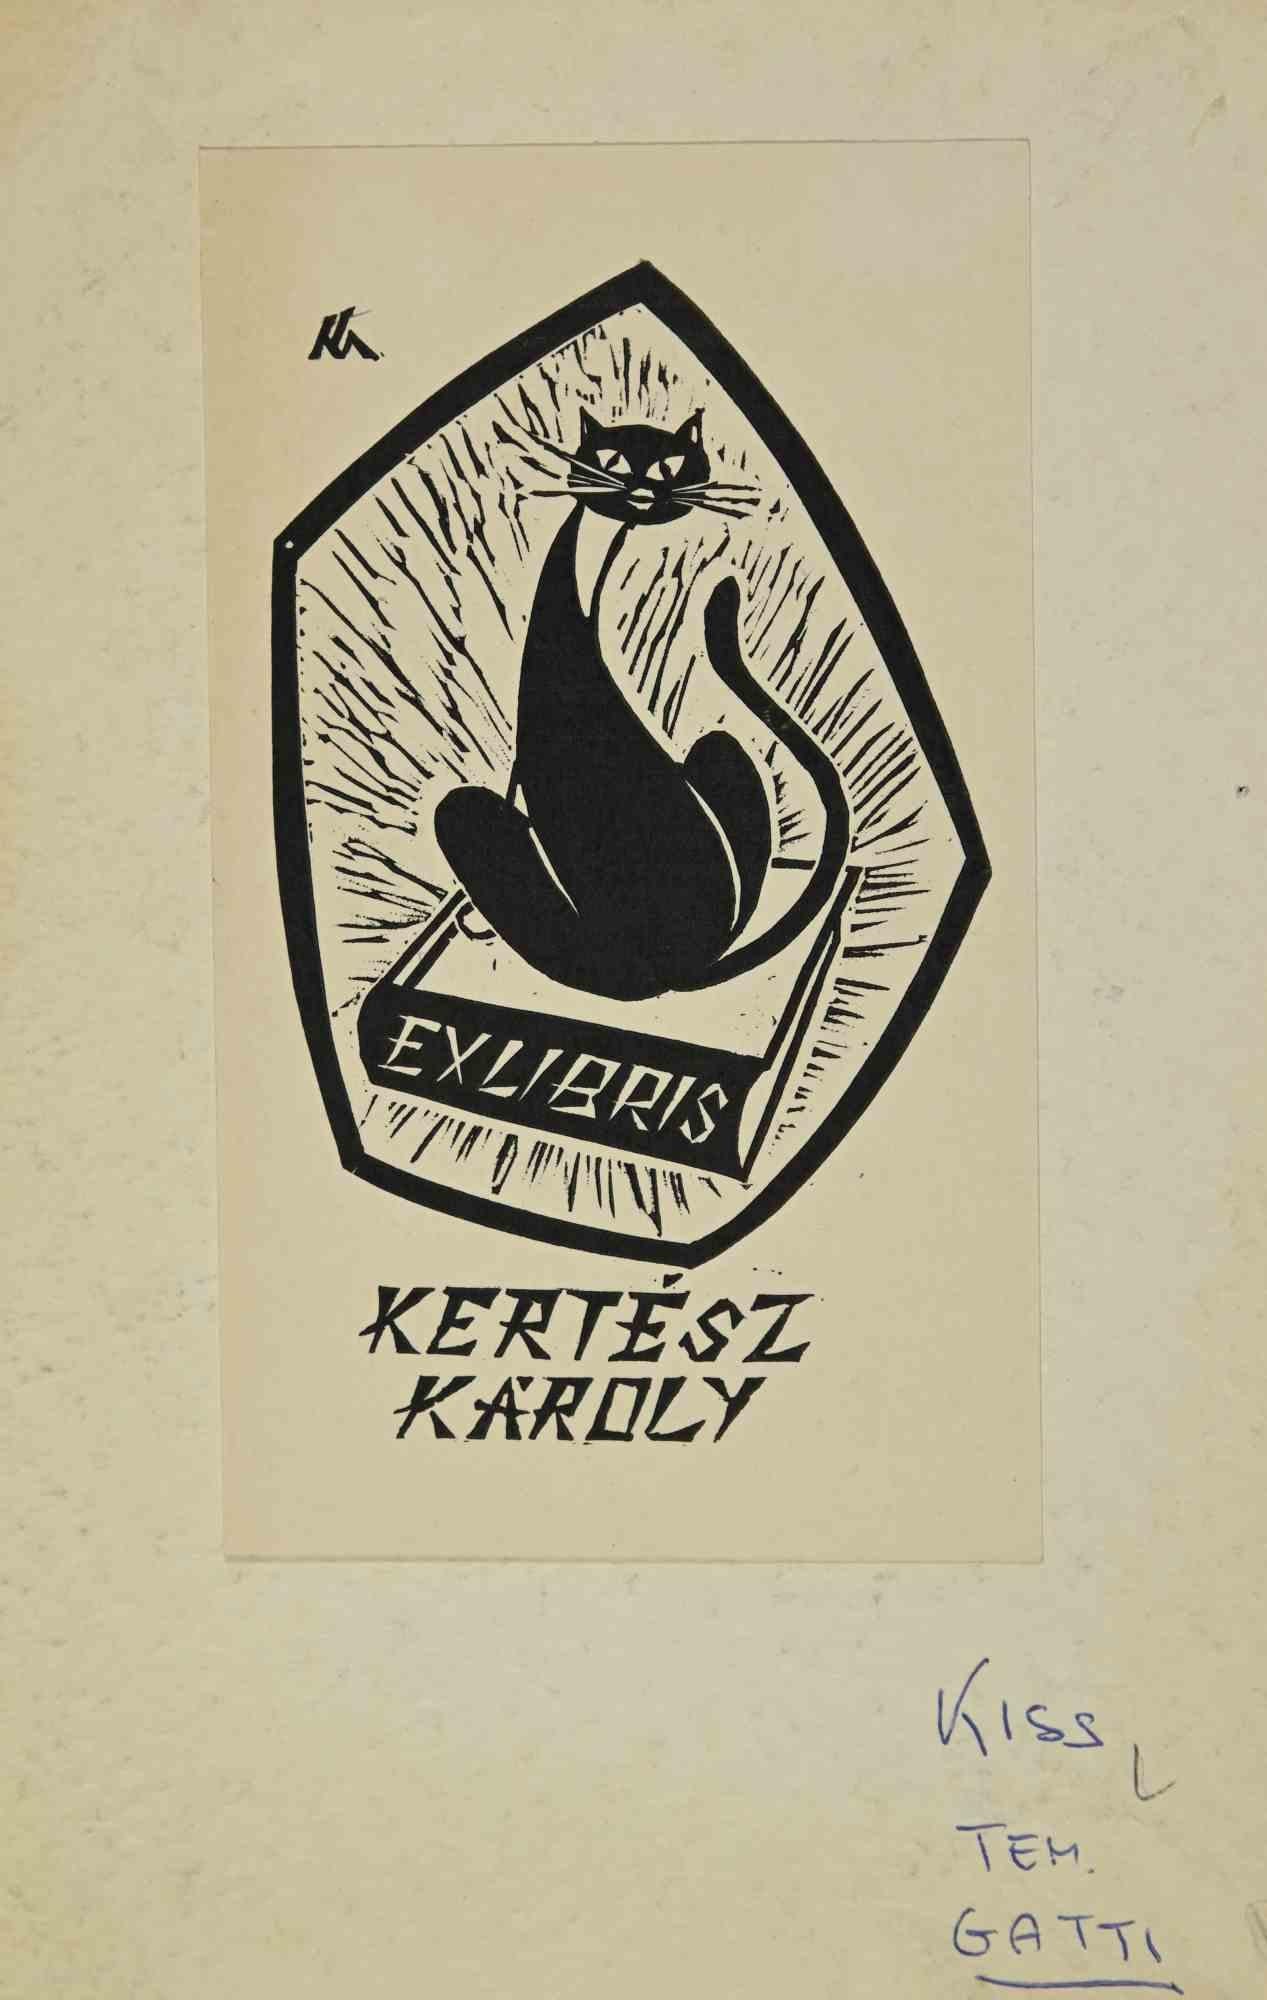 Ex libris - Kertész Karoly is an Artwork realized in 1964, by József Kiss. 

Woodcut print on ivory paper. 

The work is glued on cardboard.

Total dimensions: 21.5x14.5 cm.

Good conditions.

The artist wants to define a well-balanced composition,